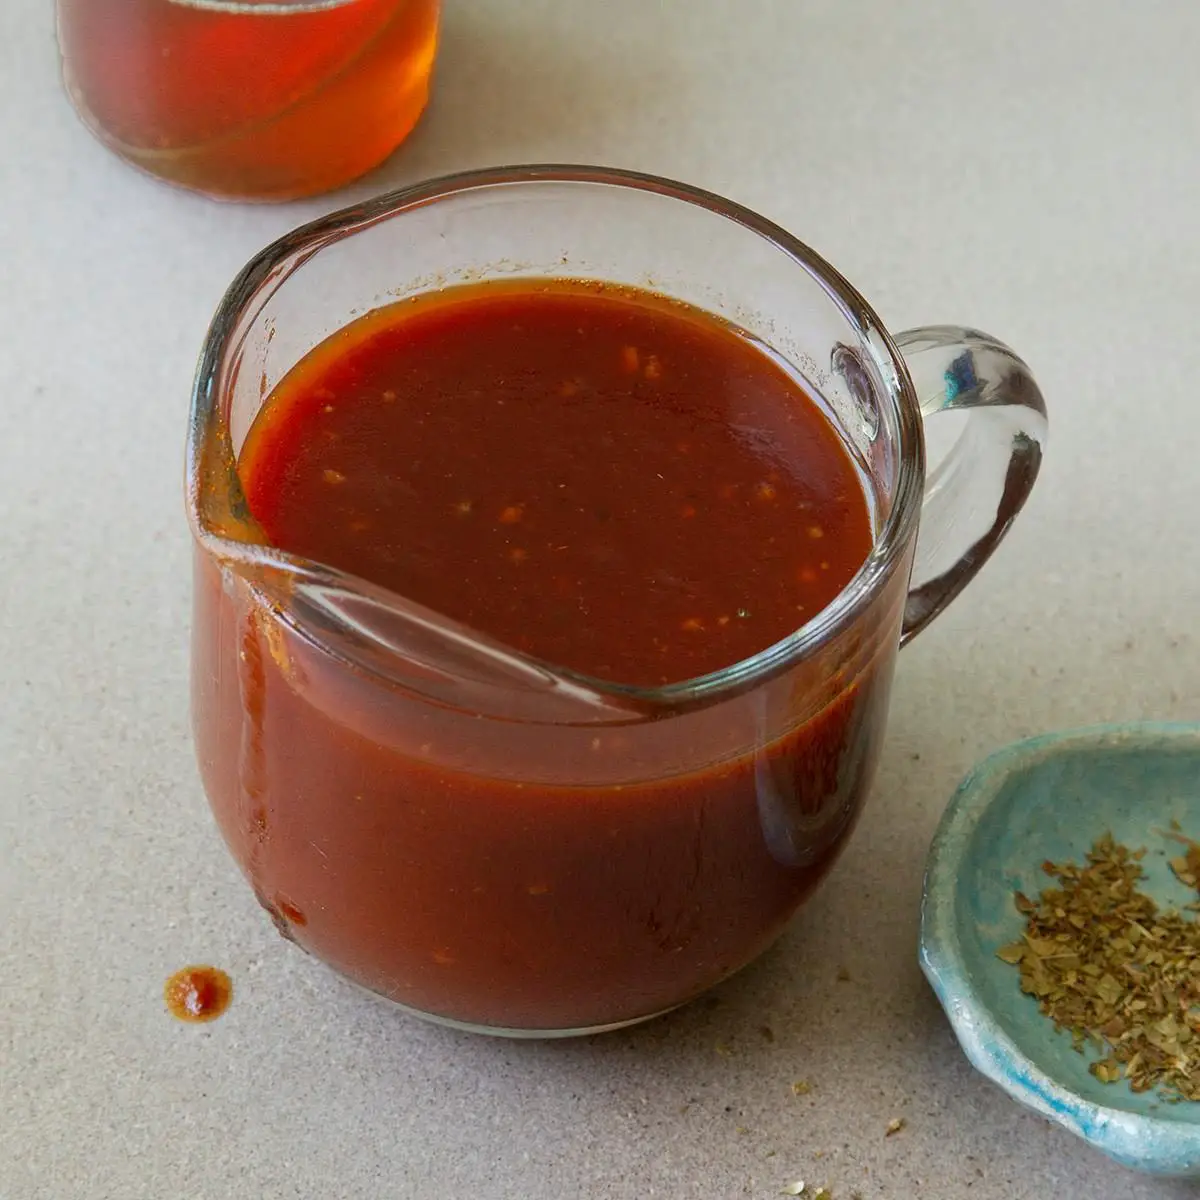 Honey Barbecue Sauce Recipe: How to Make It